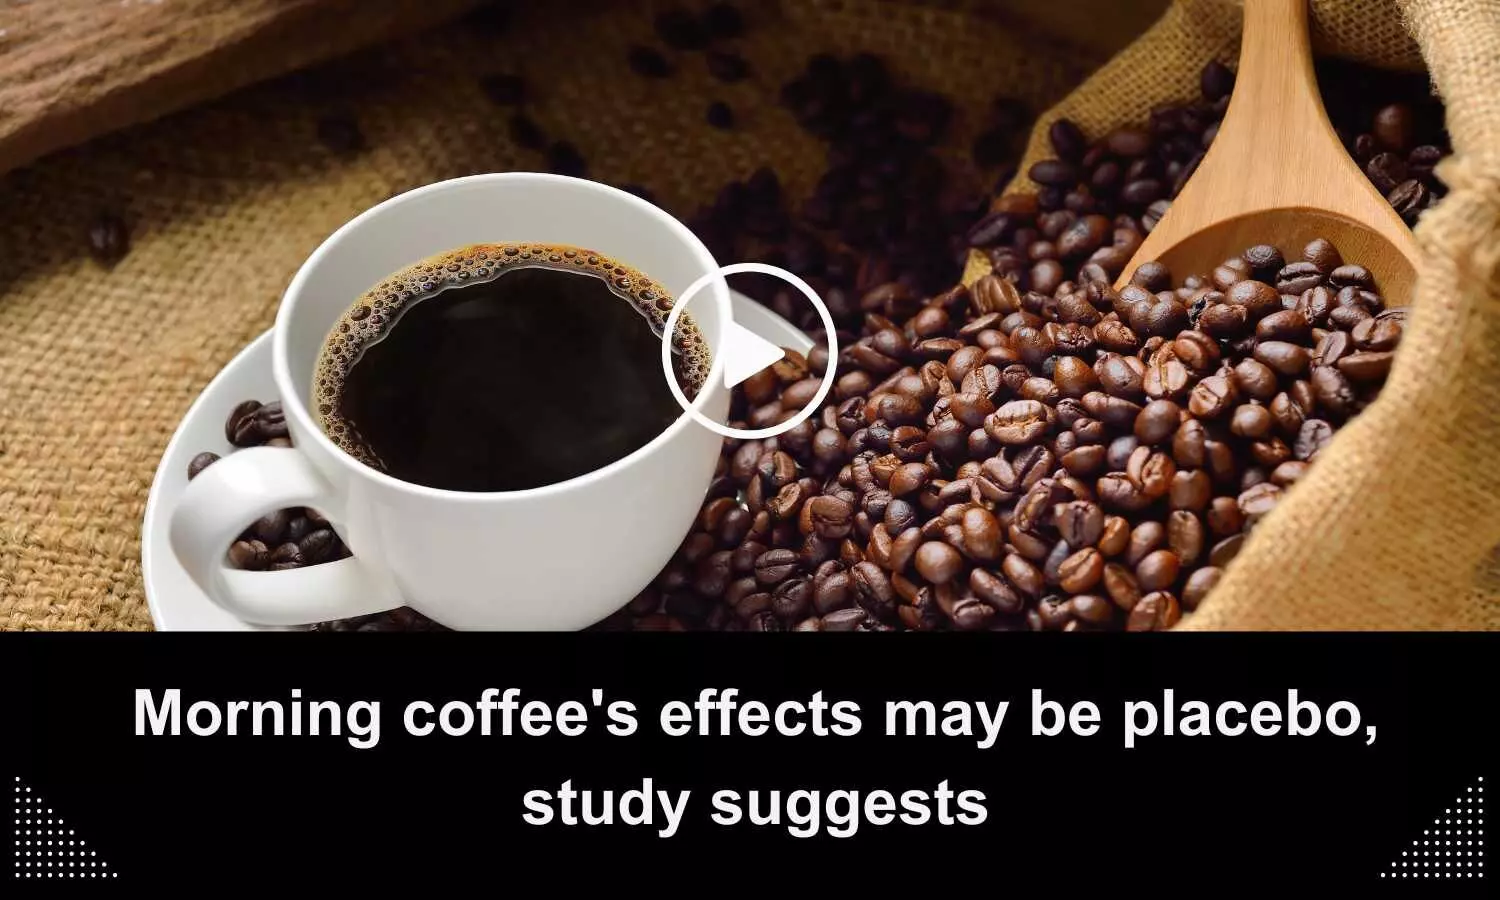 Morning coffees effects may be placebo, study suggests